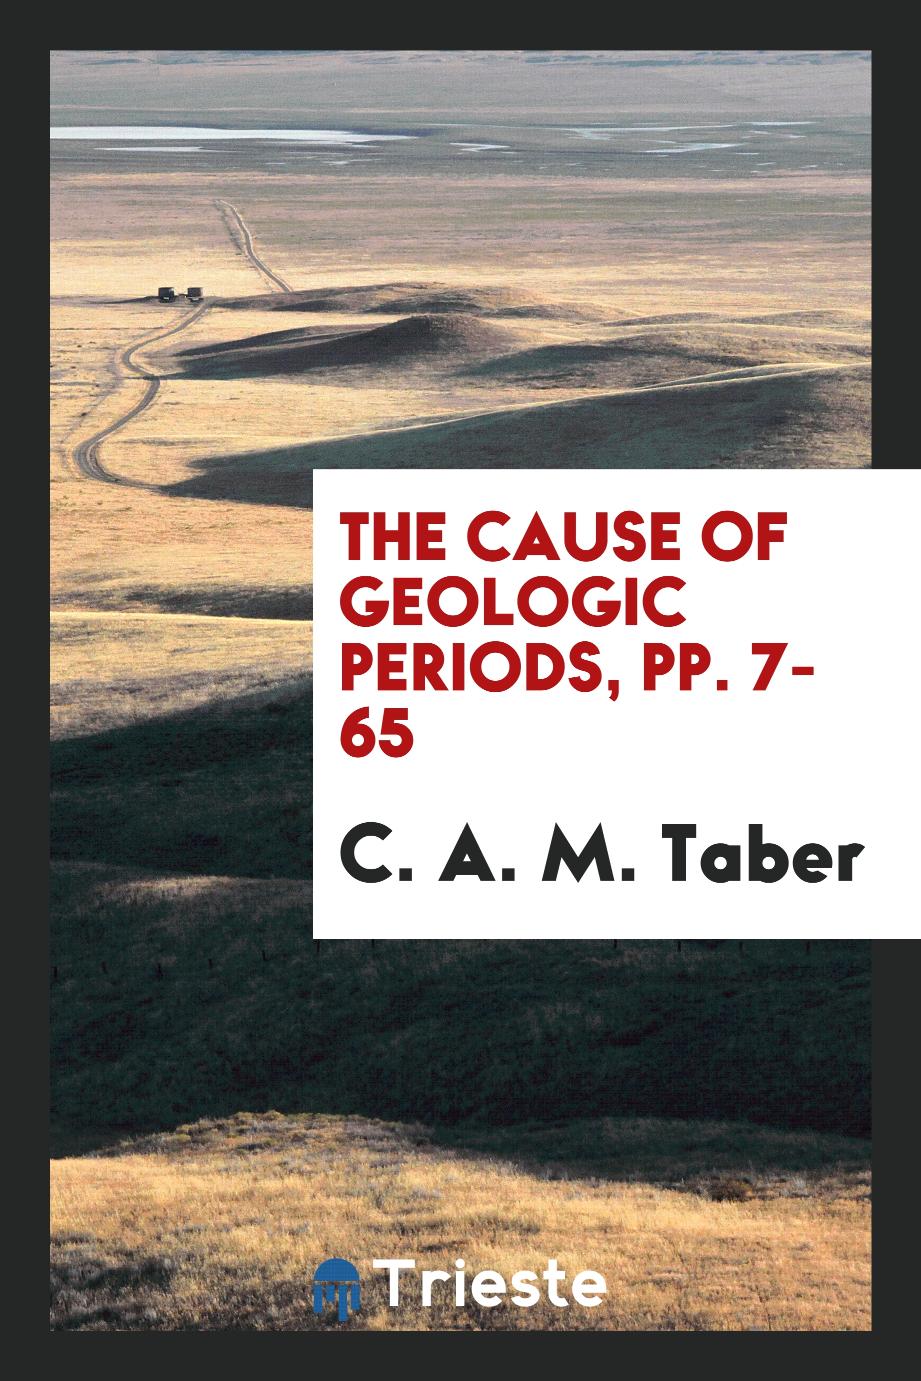 The Cause of Geologic Periods, pp. 7-65